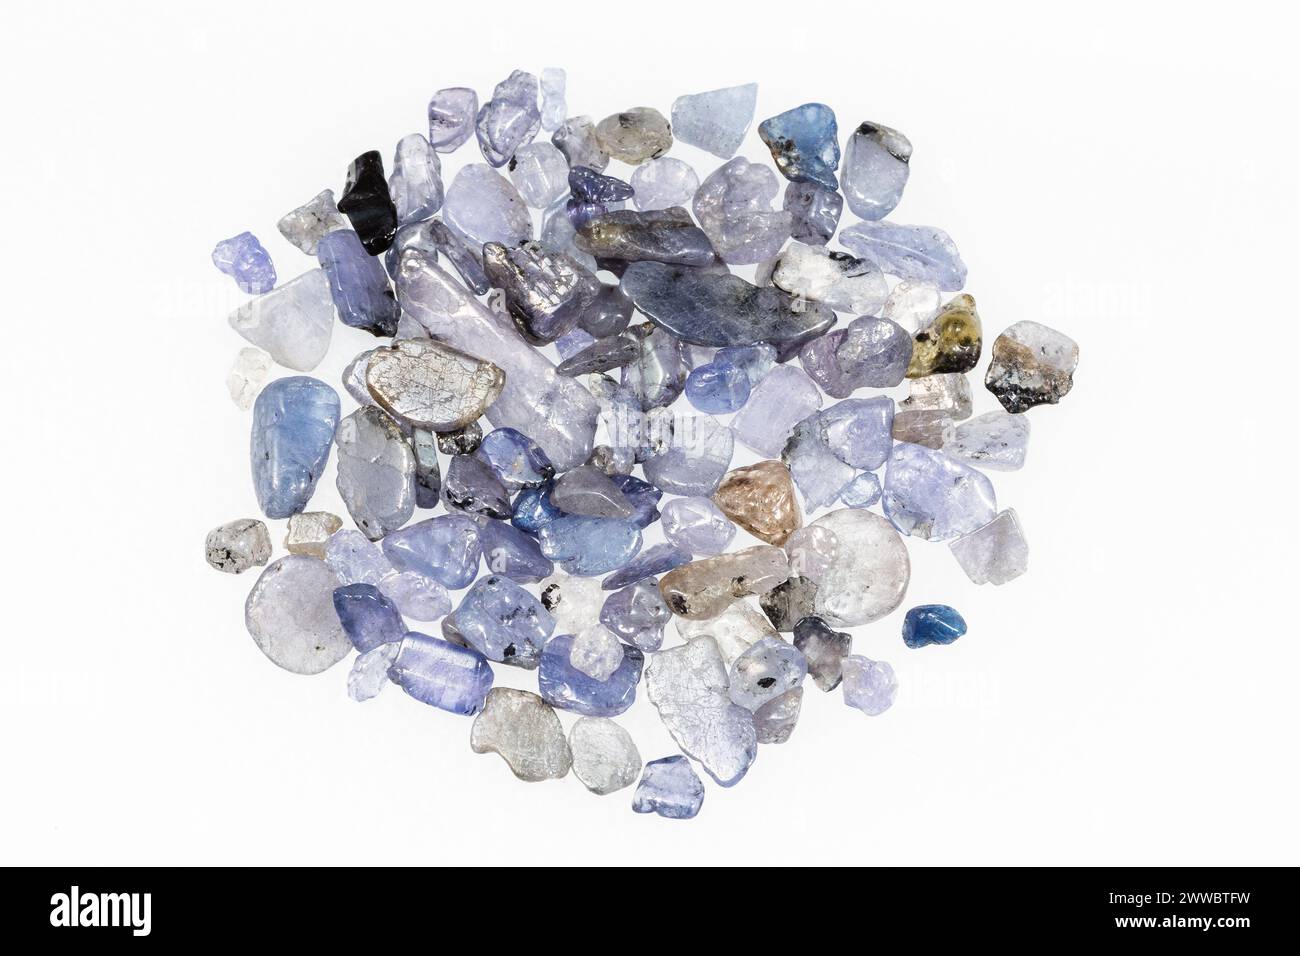 close up of sample of natural stone from geological collection - many unpolished tanzanite gemstones on white background from Tanzania Stock Photo